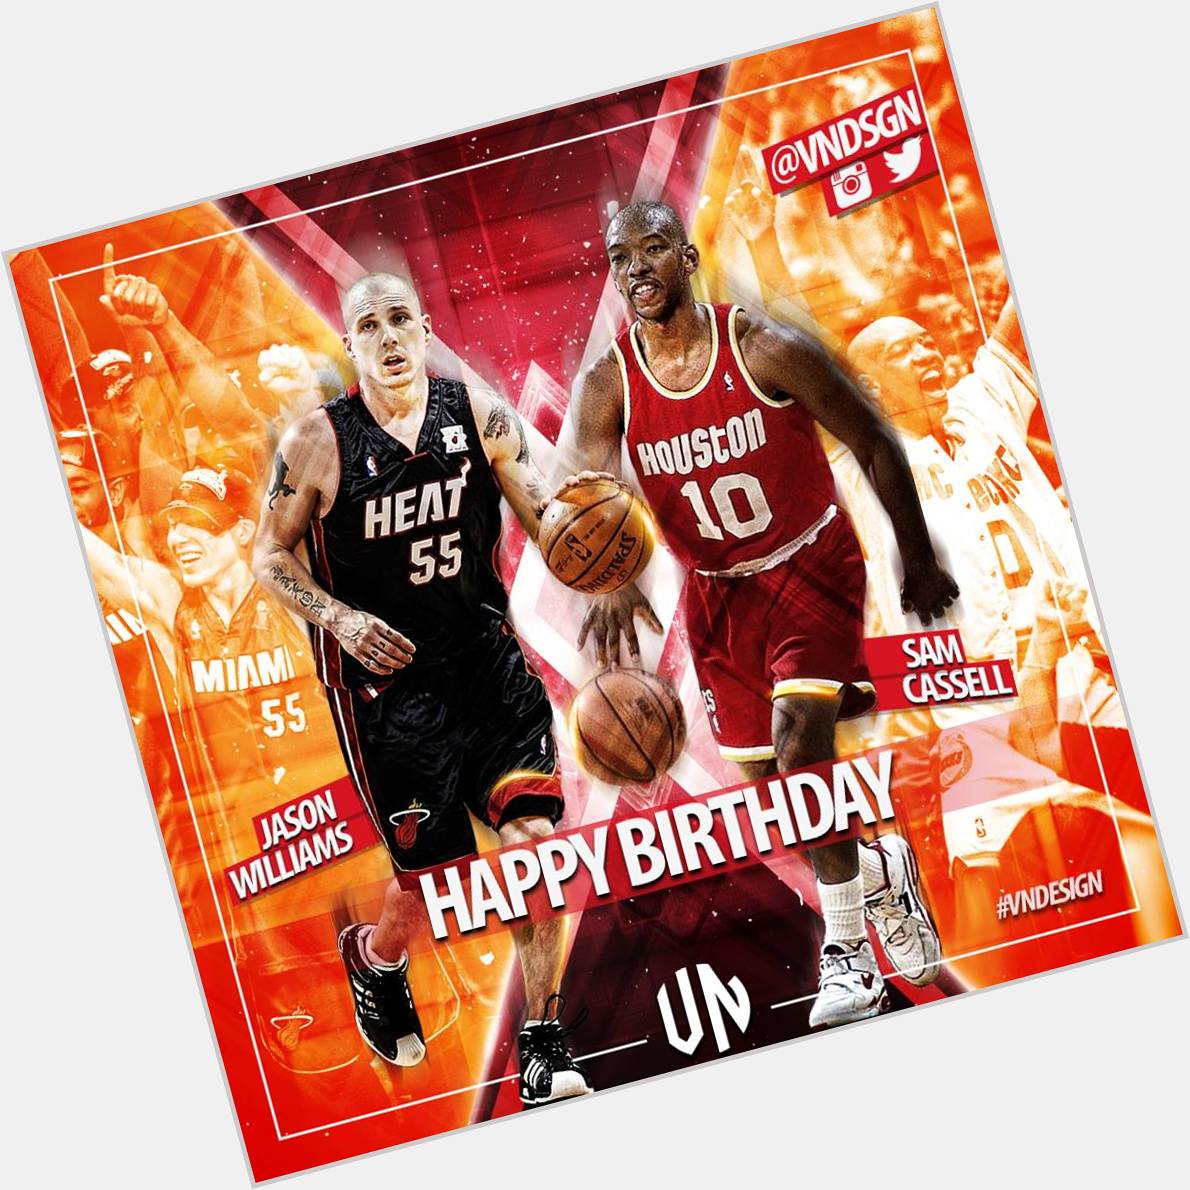 Join me in wishing a happy birthday to Jason Williams & Sam Cassell ! 